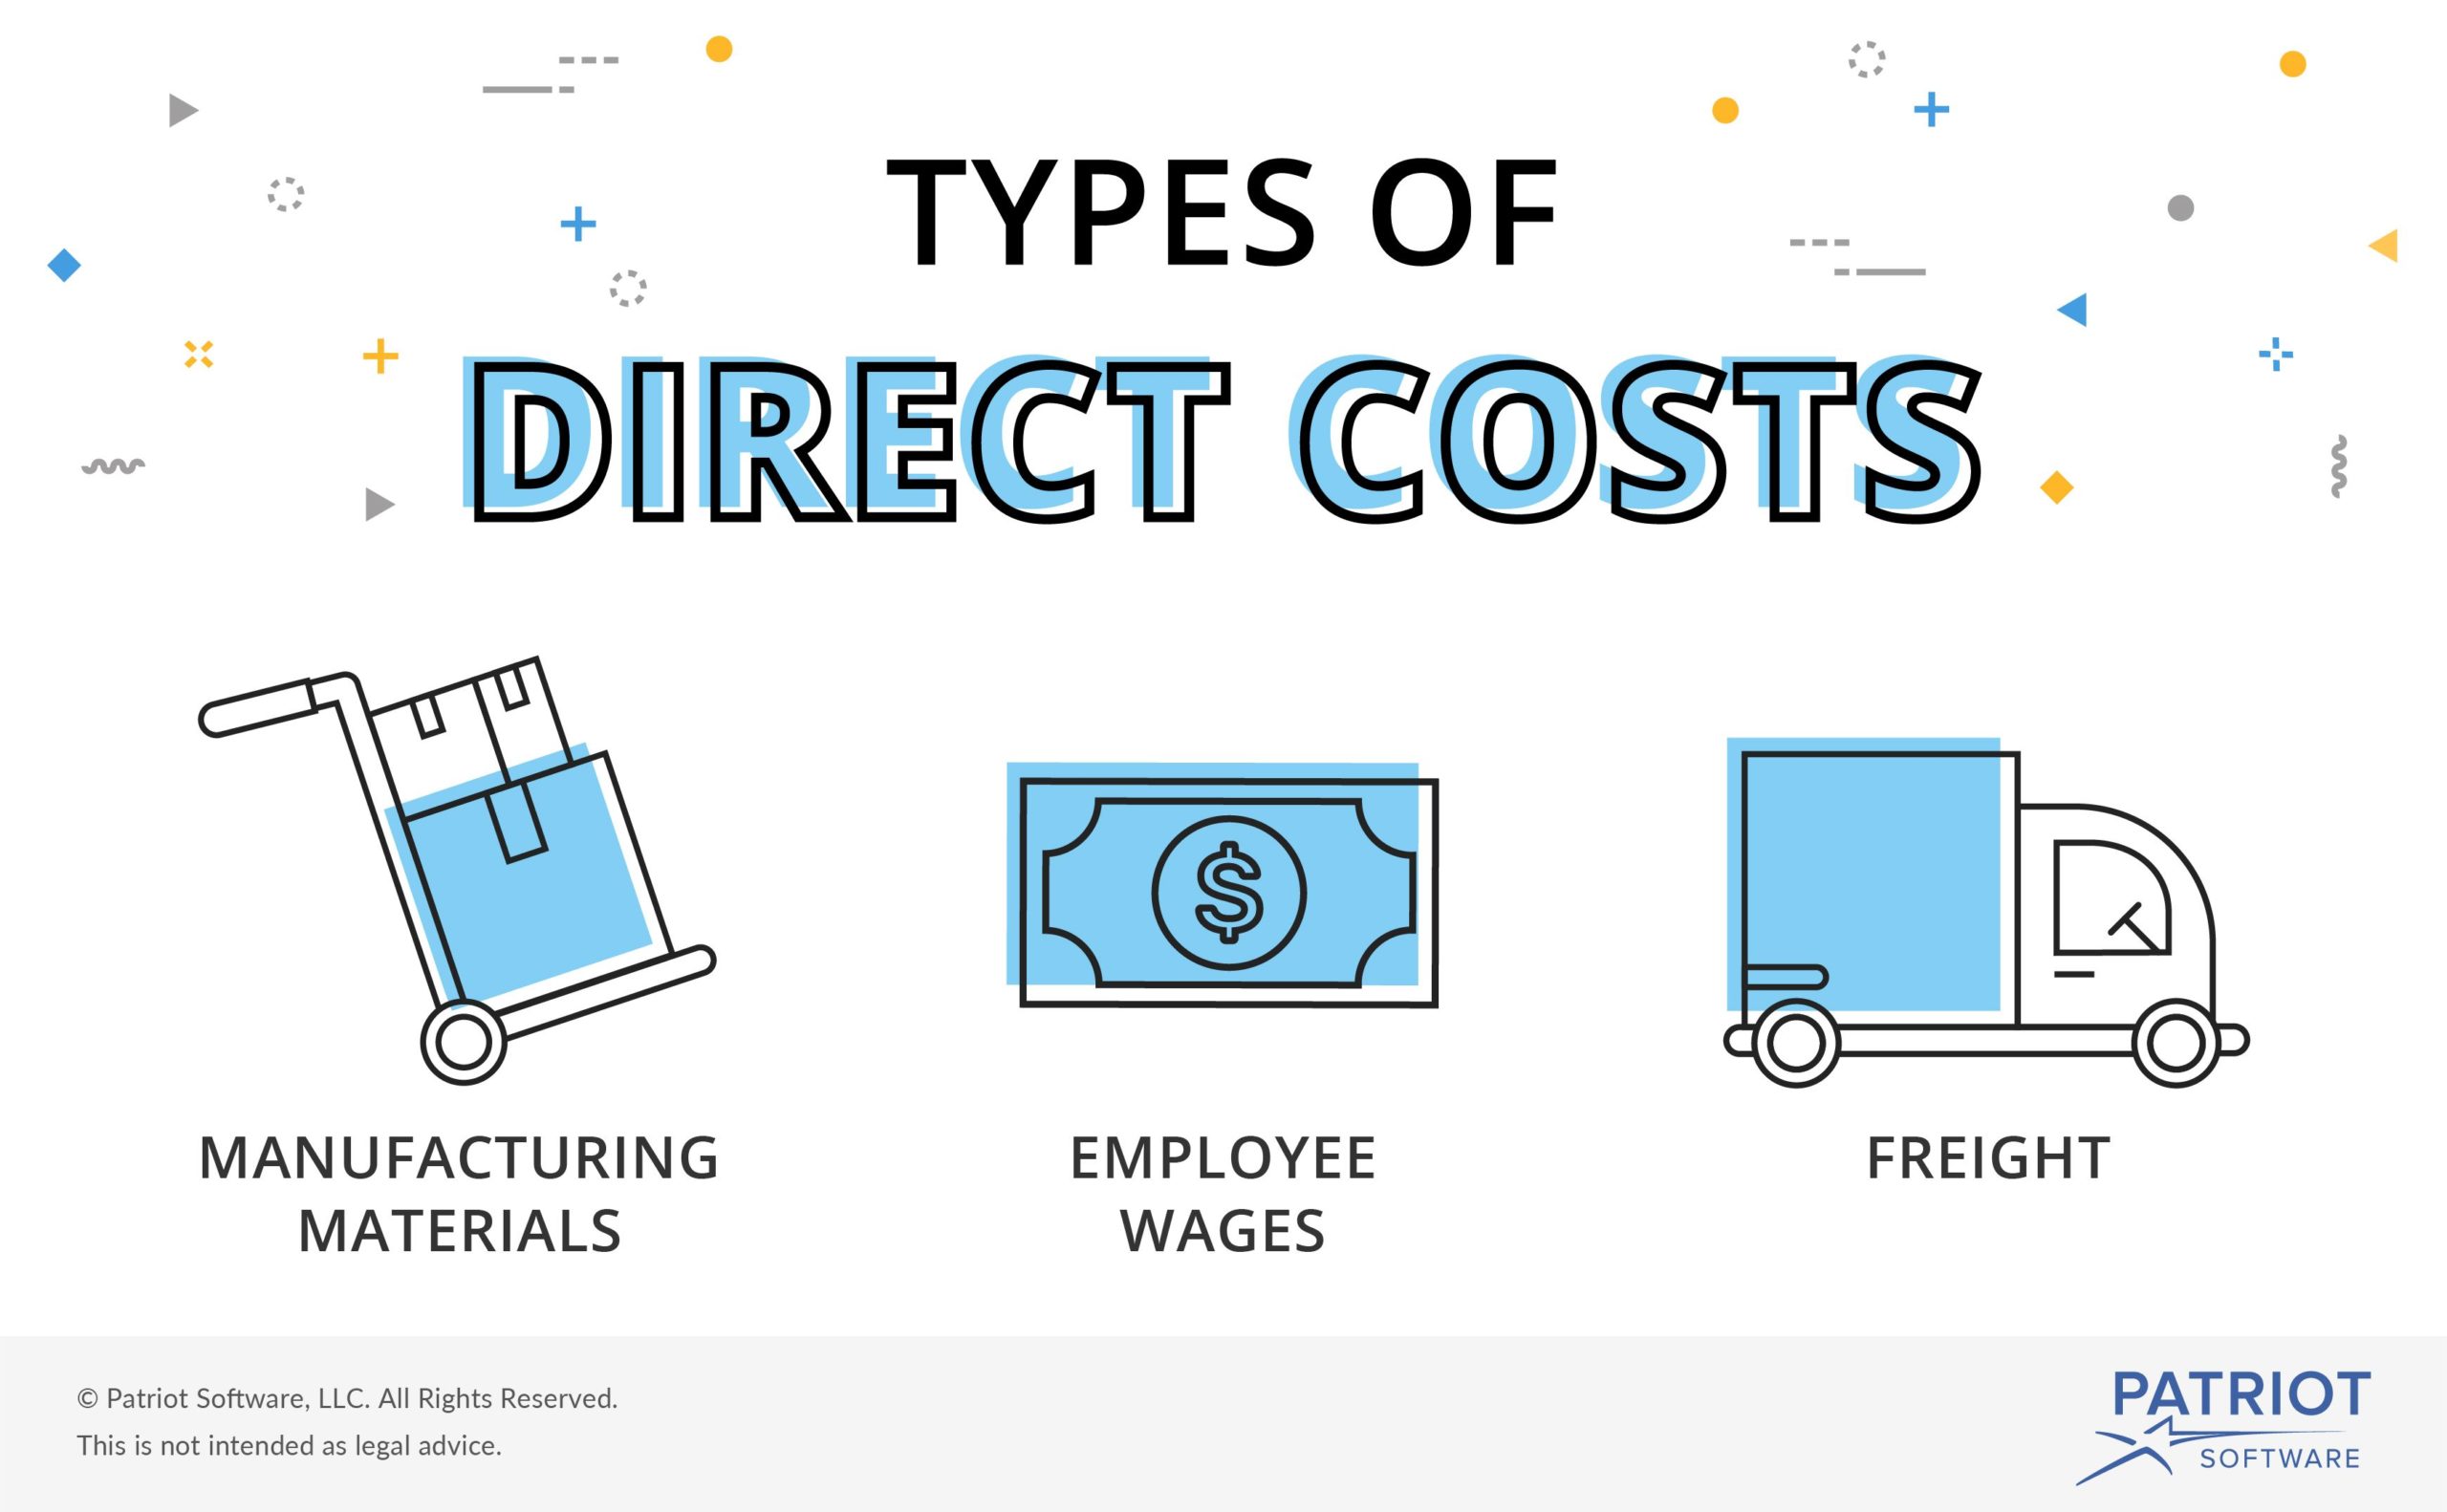 Types of direct costs graphic